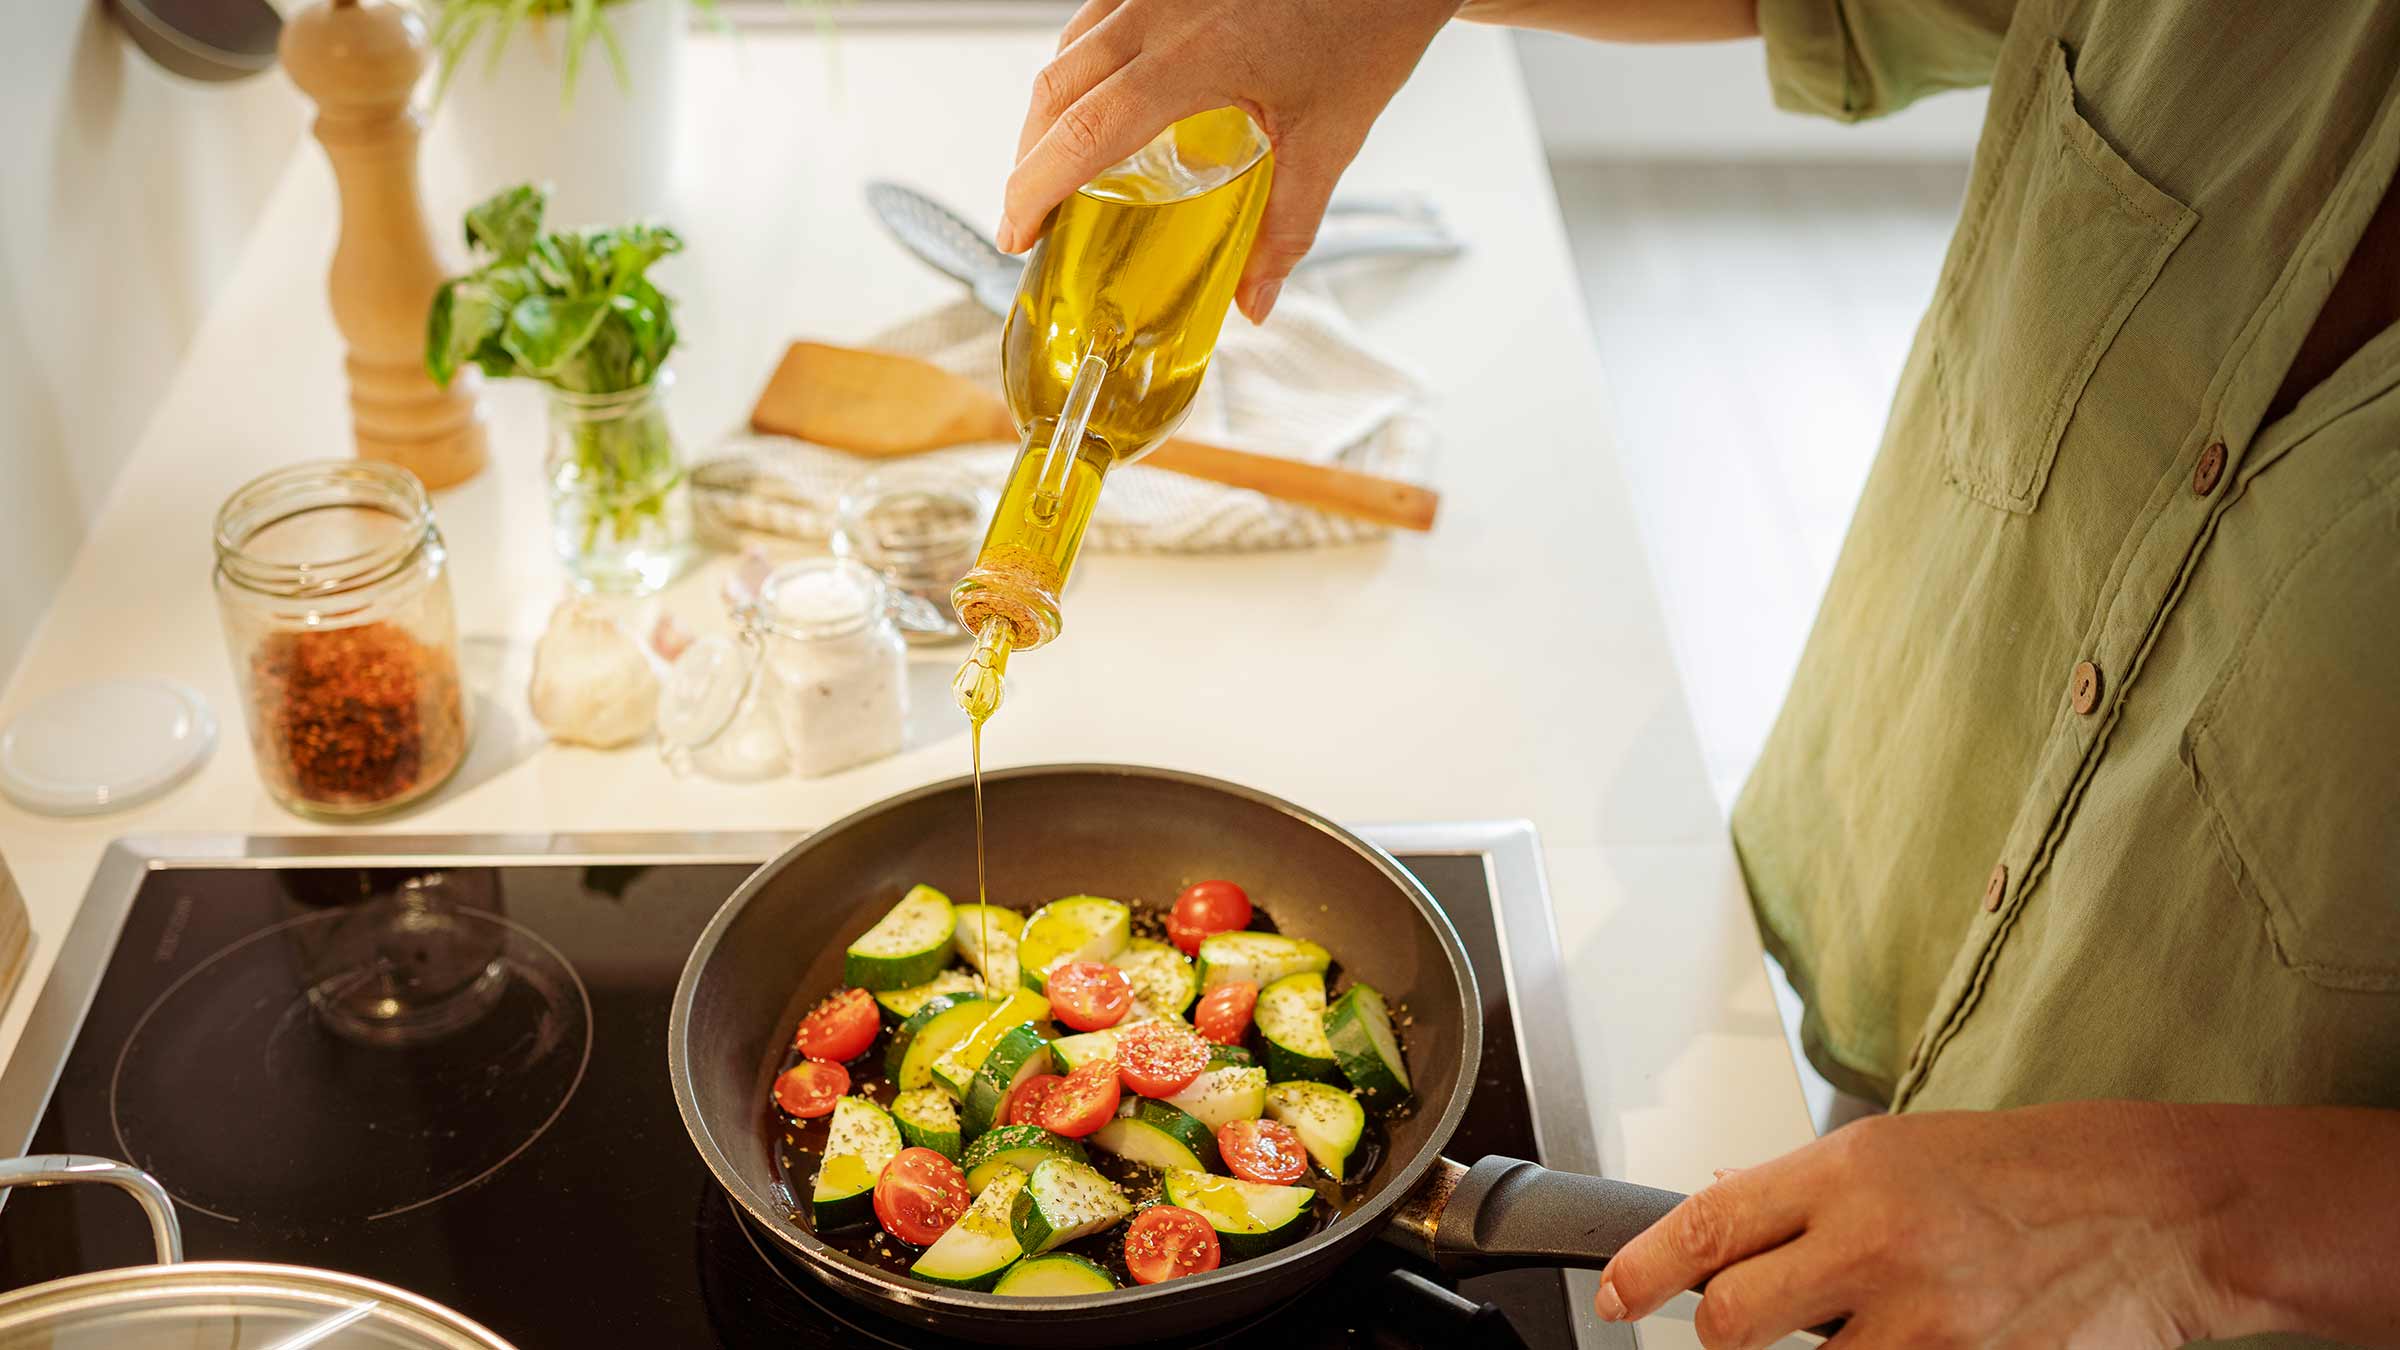 A person pouring oil onto vegetables in a frying pan